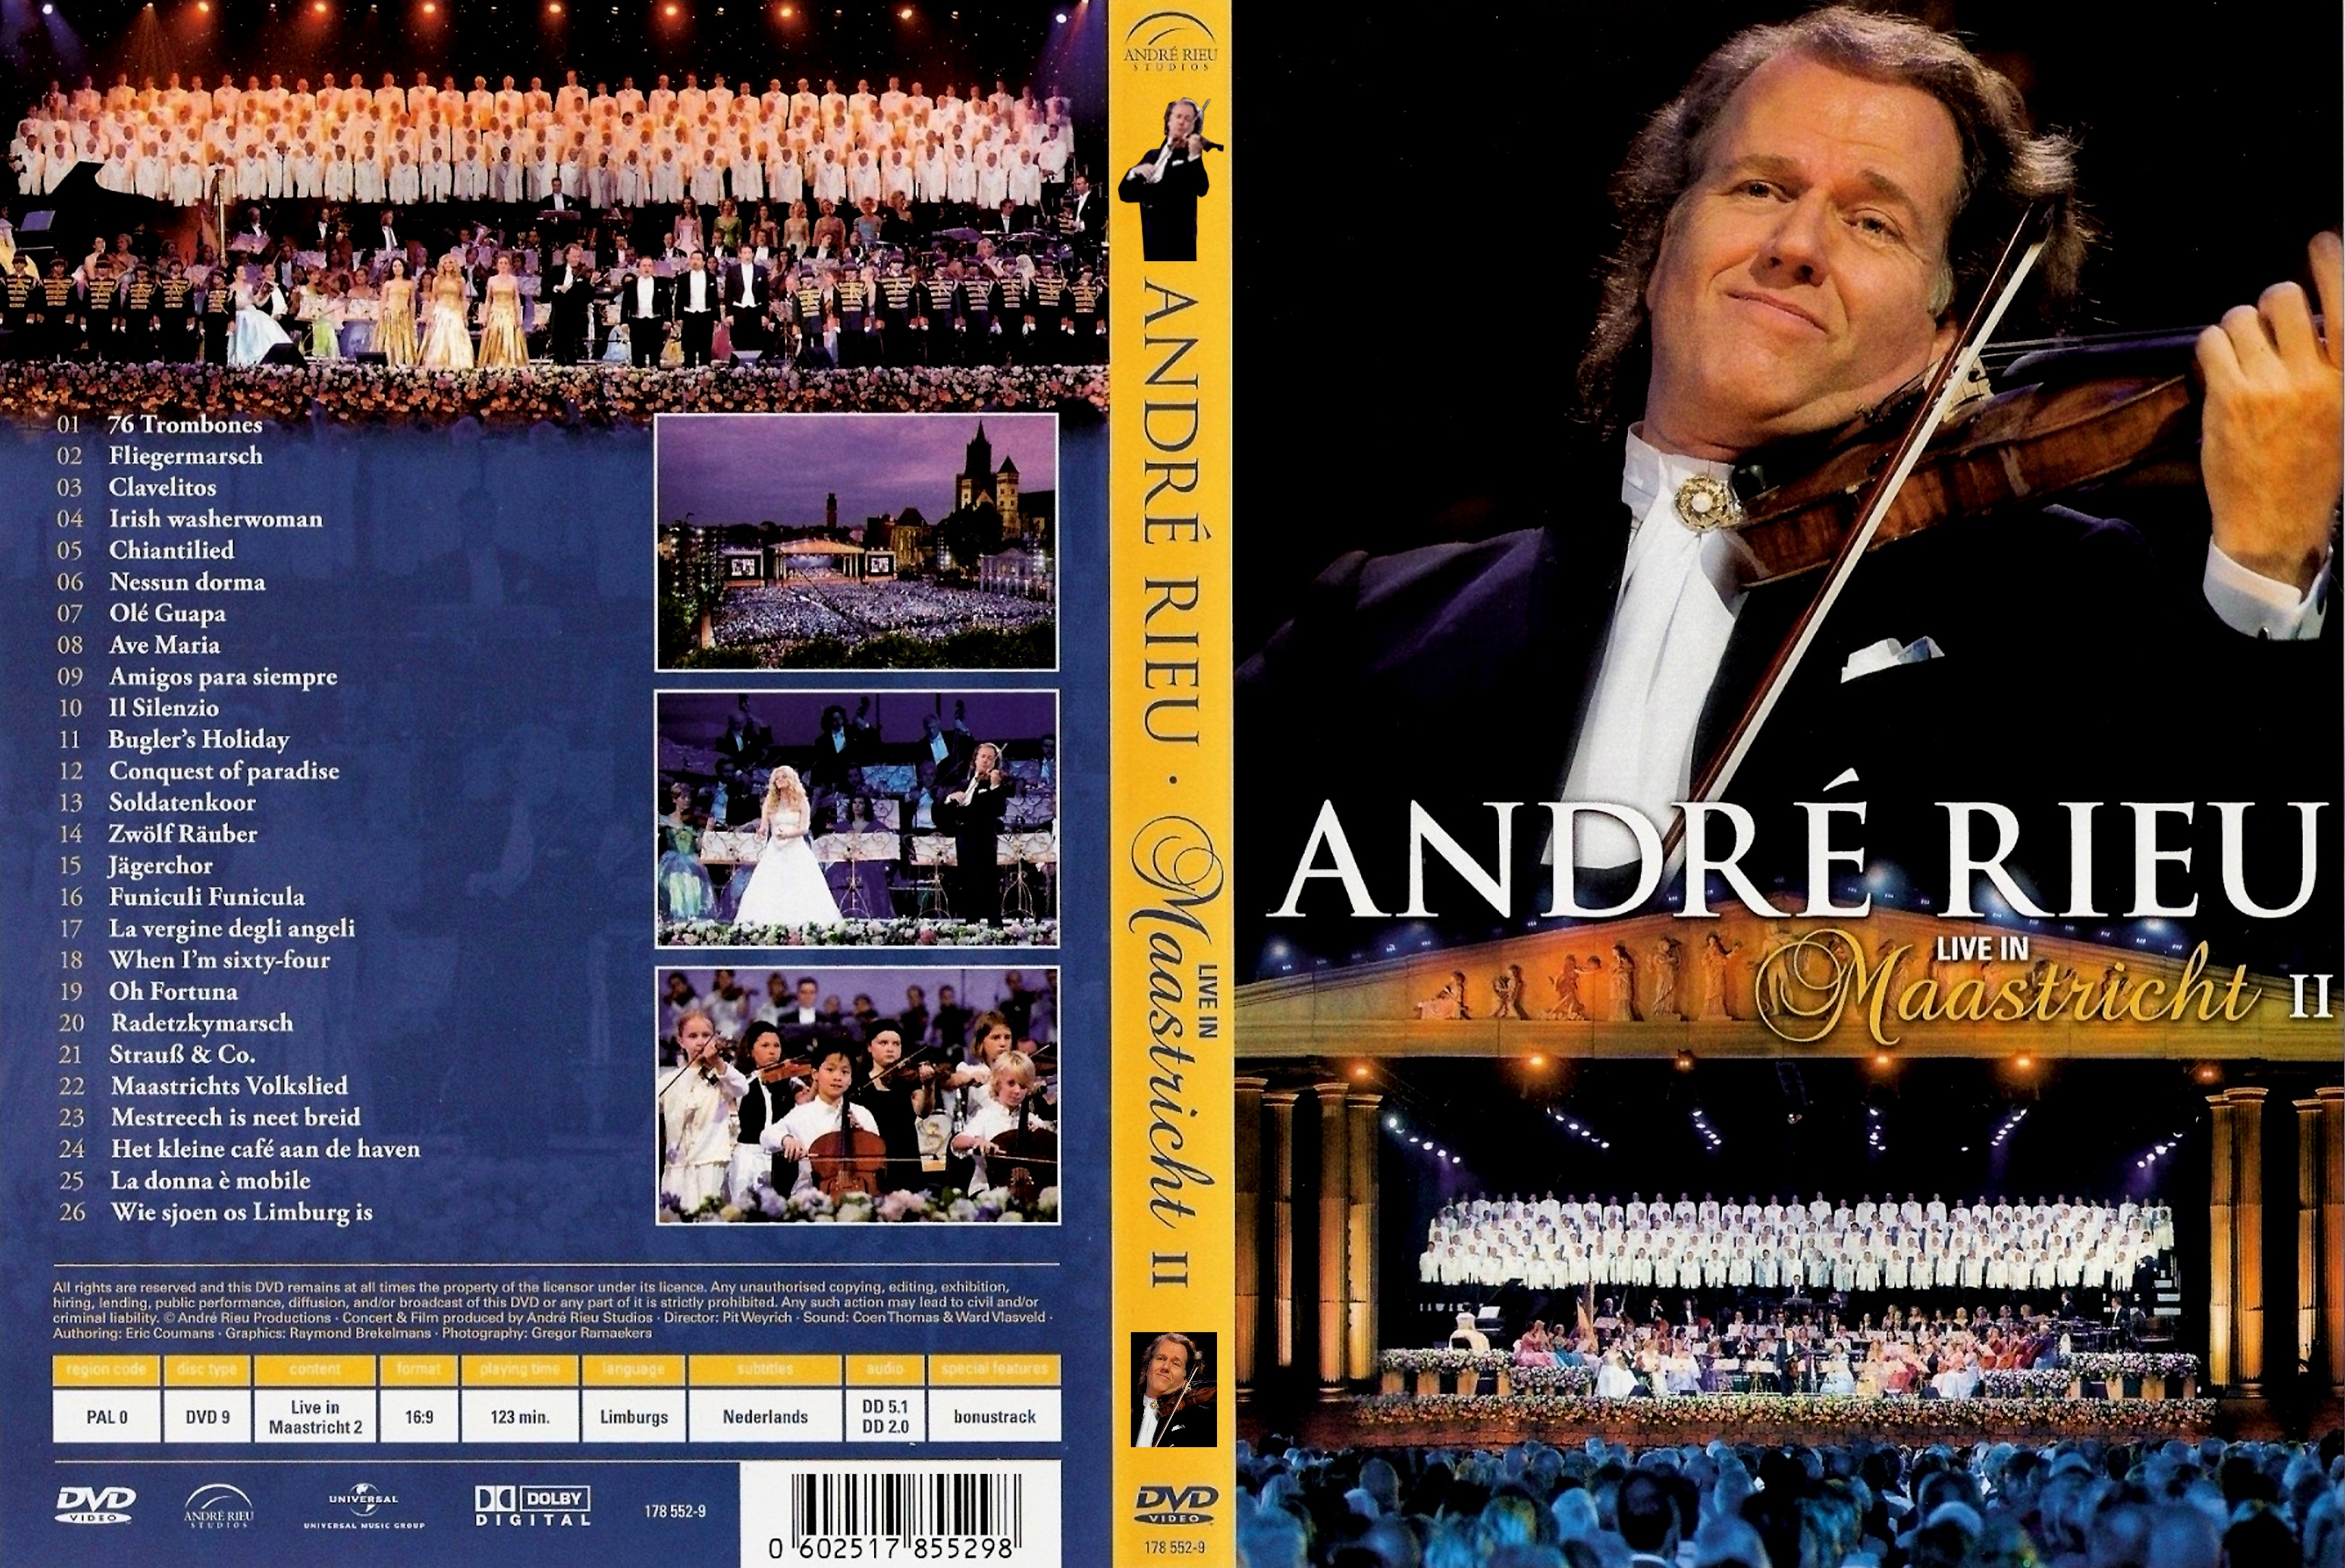 Jaquette DVD Andr Rieu - Live in Maastricht 2 (2008)